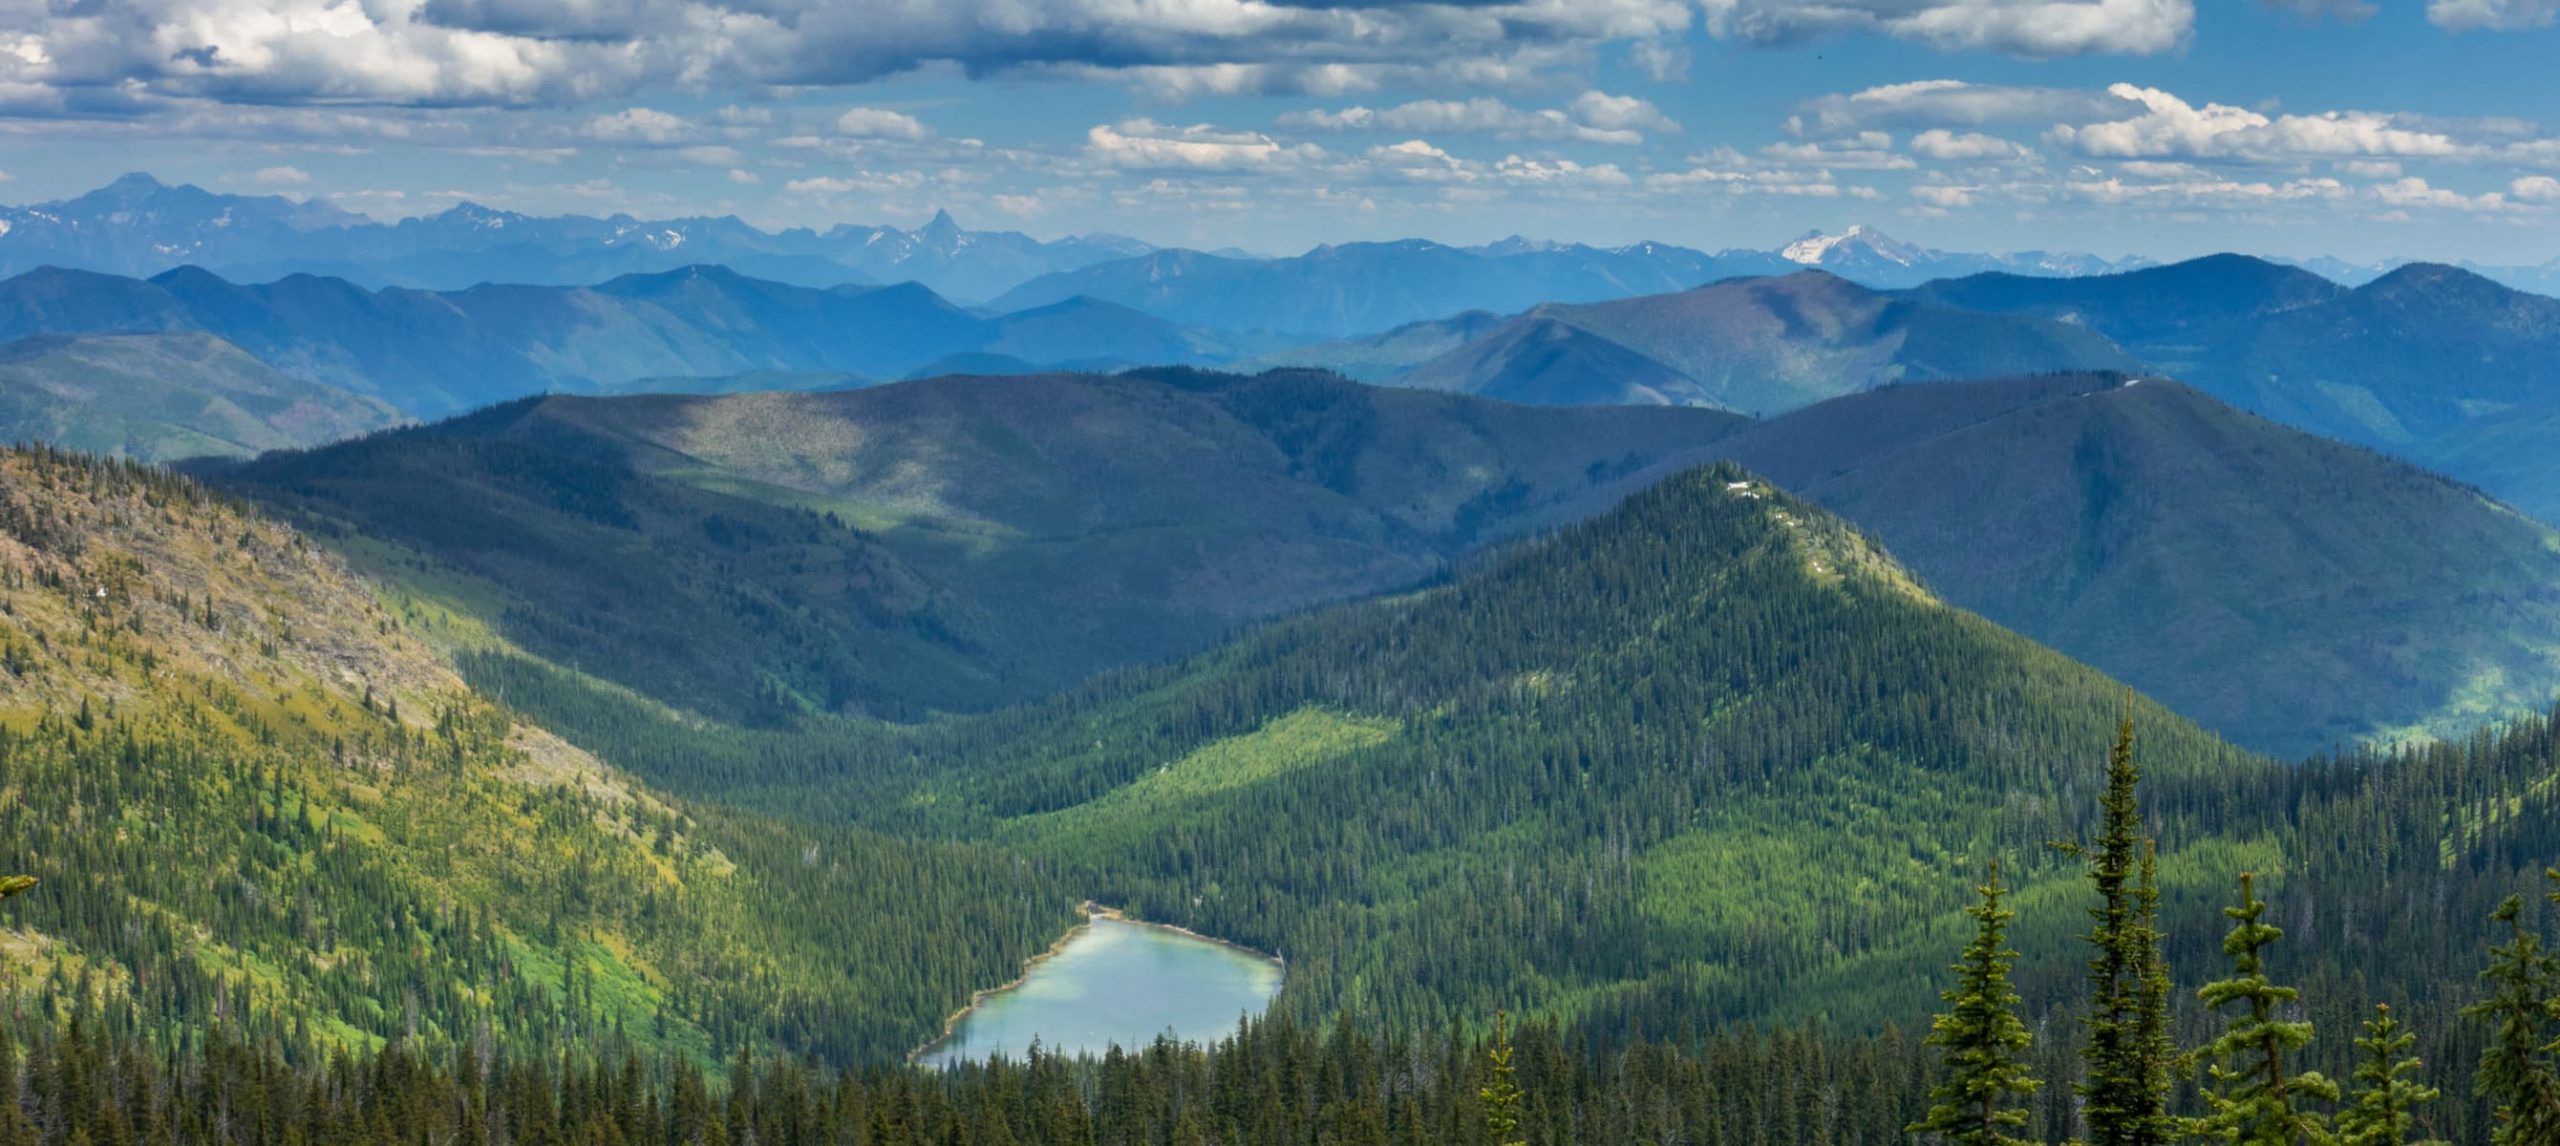 The Moose Lake viewed from the Flathead National Forest, in Montana, USA.